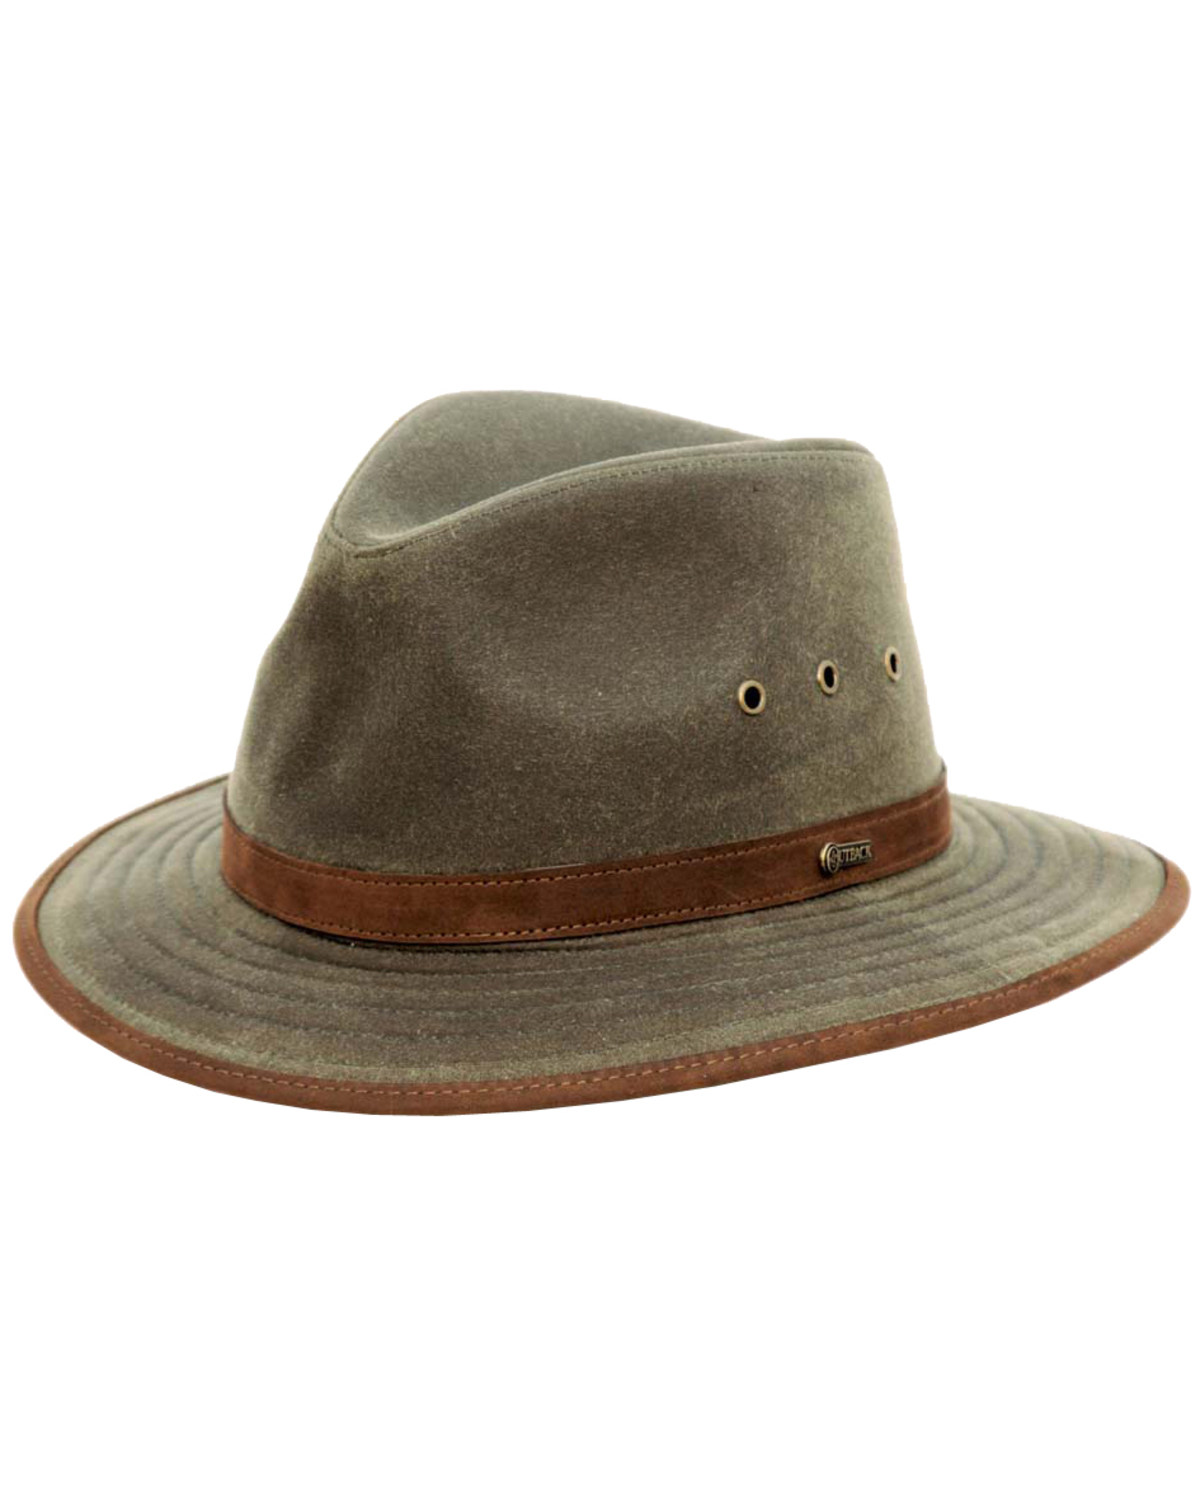 Outback Trading Co. Madison River UPF 50 Sun Protection Oilskin Hat